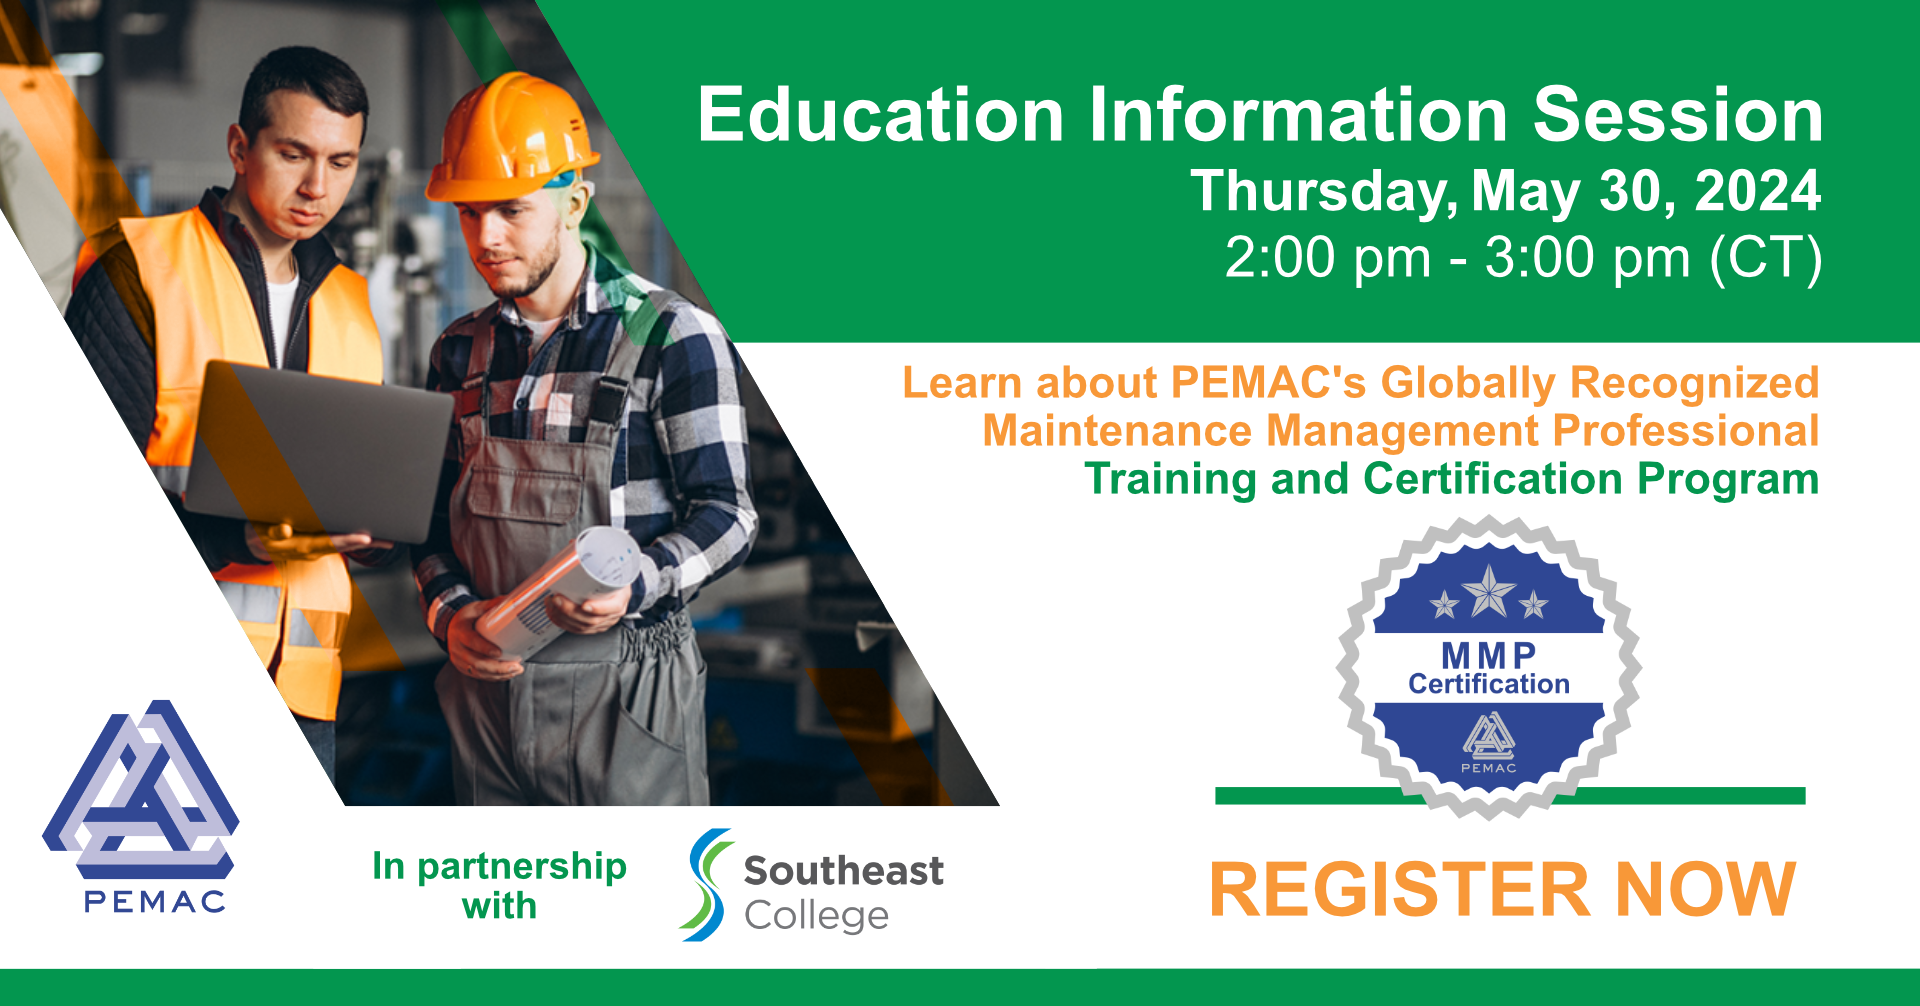 PEMAC MMP Information Session with Southeast College, May 30, 2:00pm - 3:00pm CT